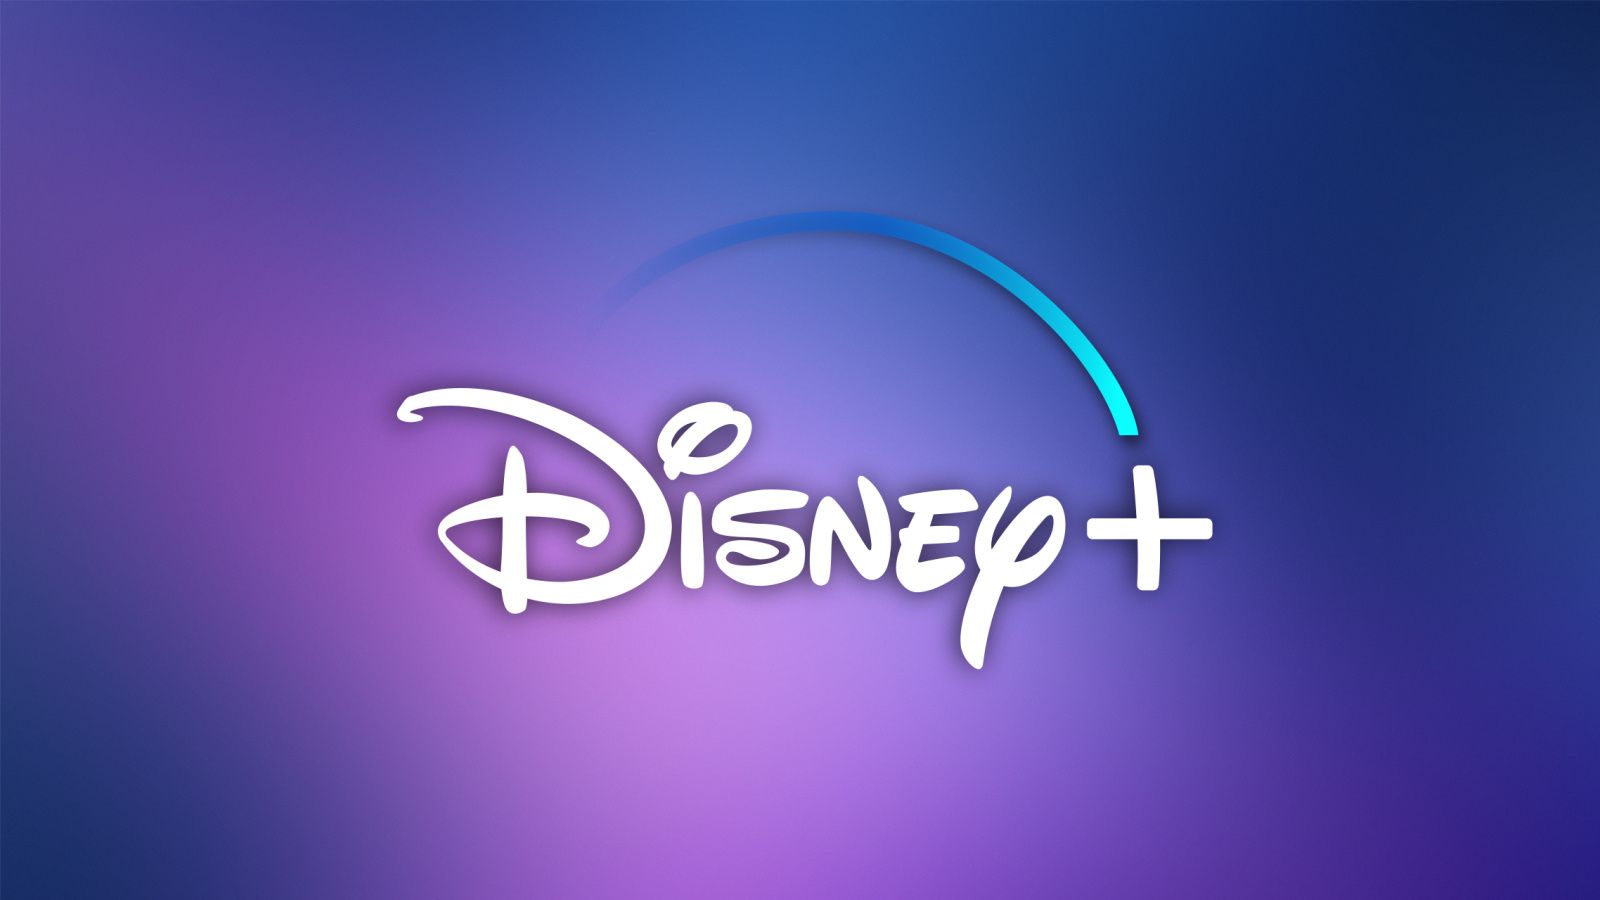 Disney+ Launching in South Africa in Winter 2022